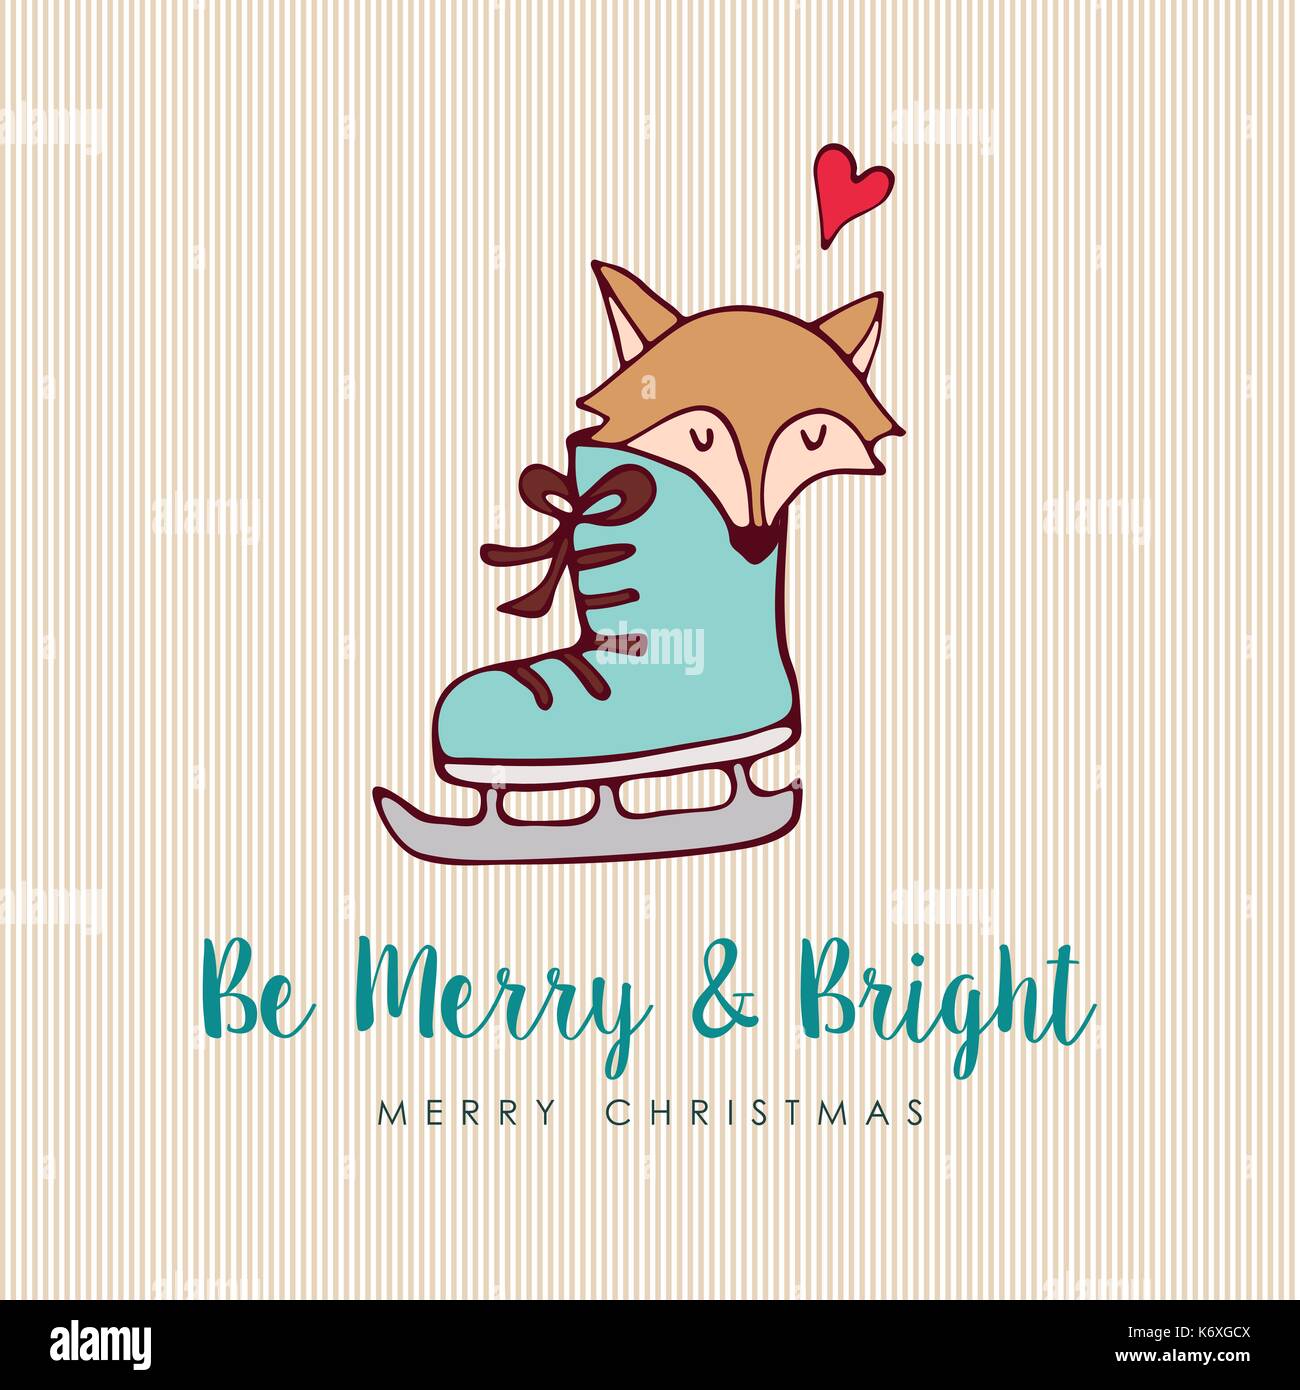 Merry Christmas hand drawn animal greeting card illustration. Funny fox inside ice skate boot with holiday typography quote. EPS10 vector. Stock Vector